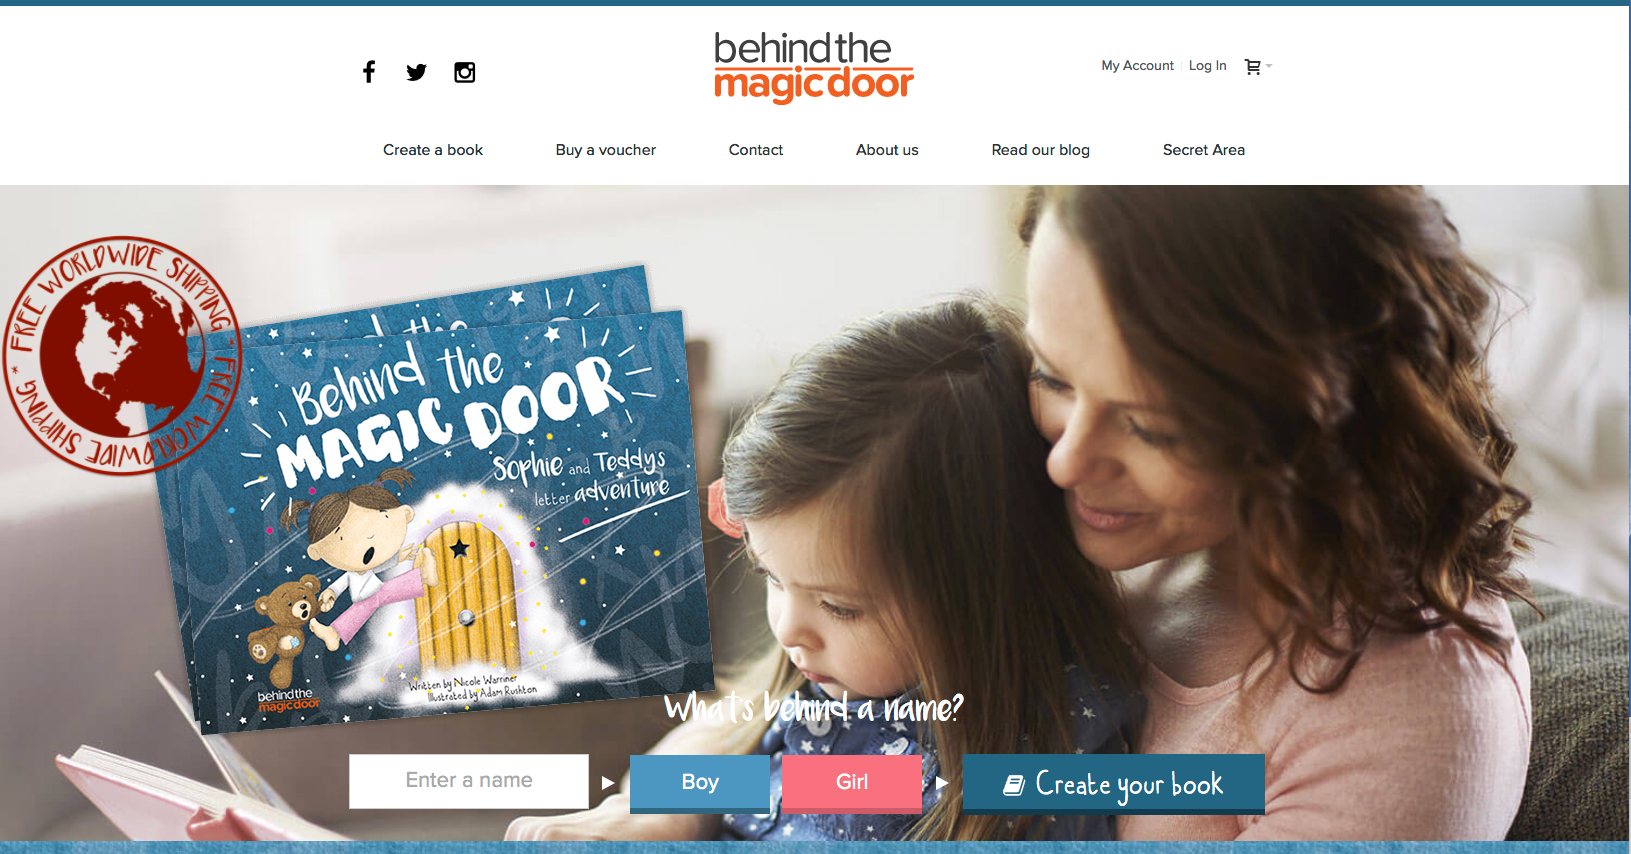 Website Screen Grab Image of 'Behind the Magic Door' homepage showing Illustrated childrens book